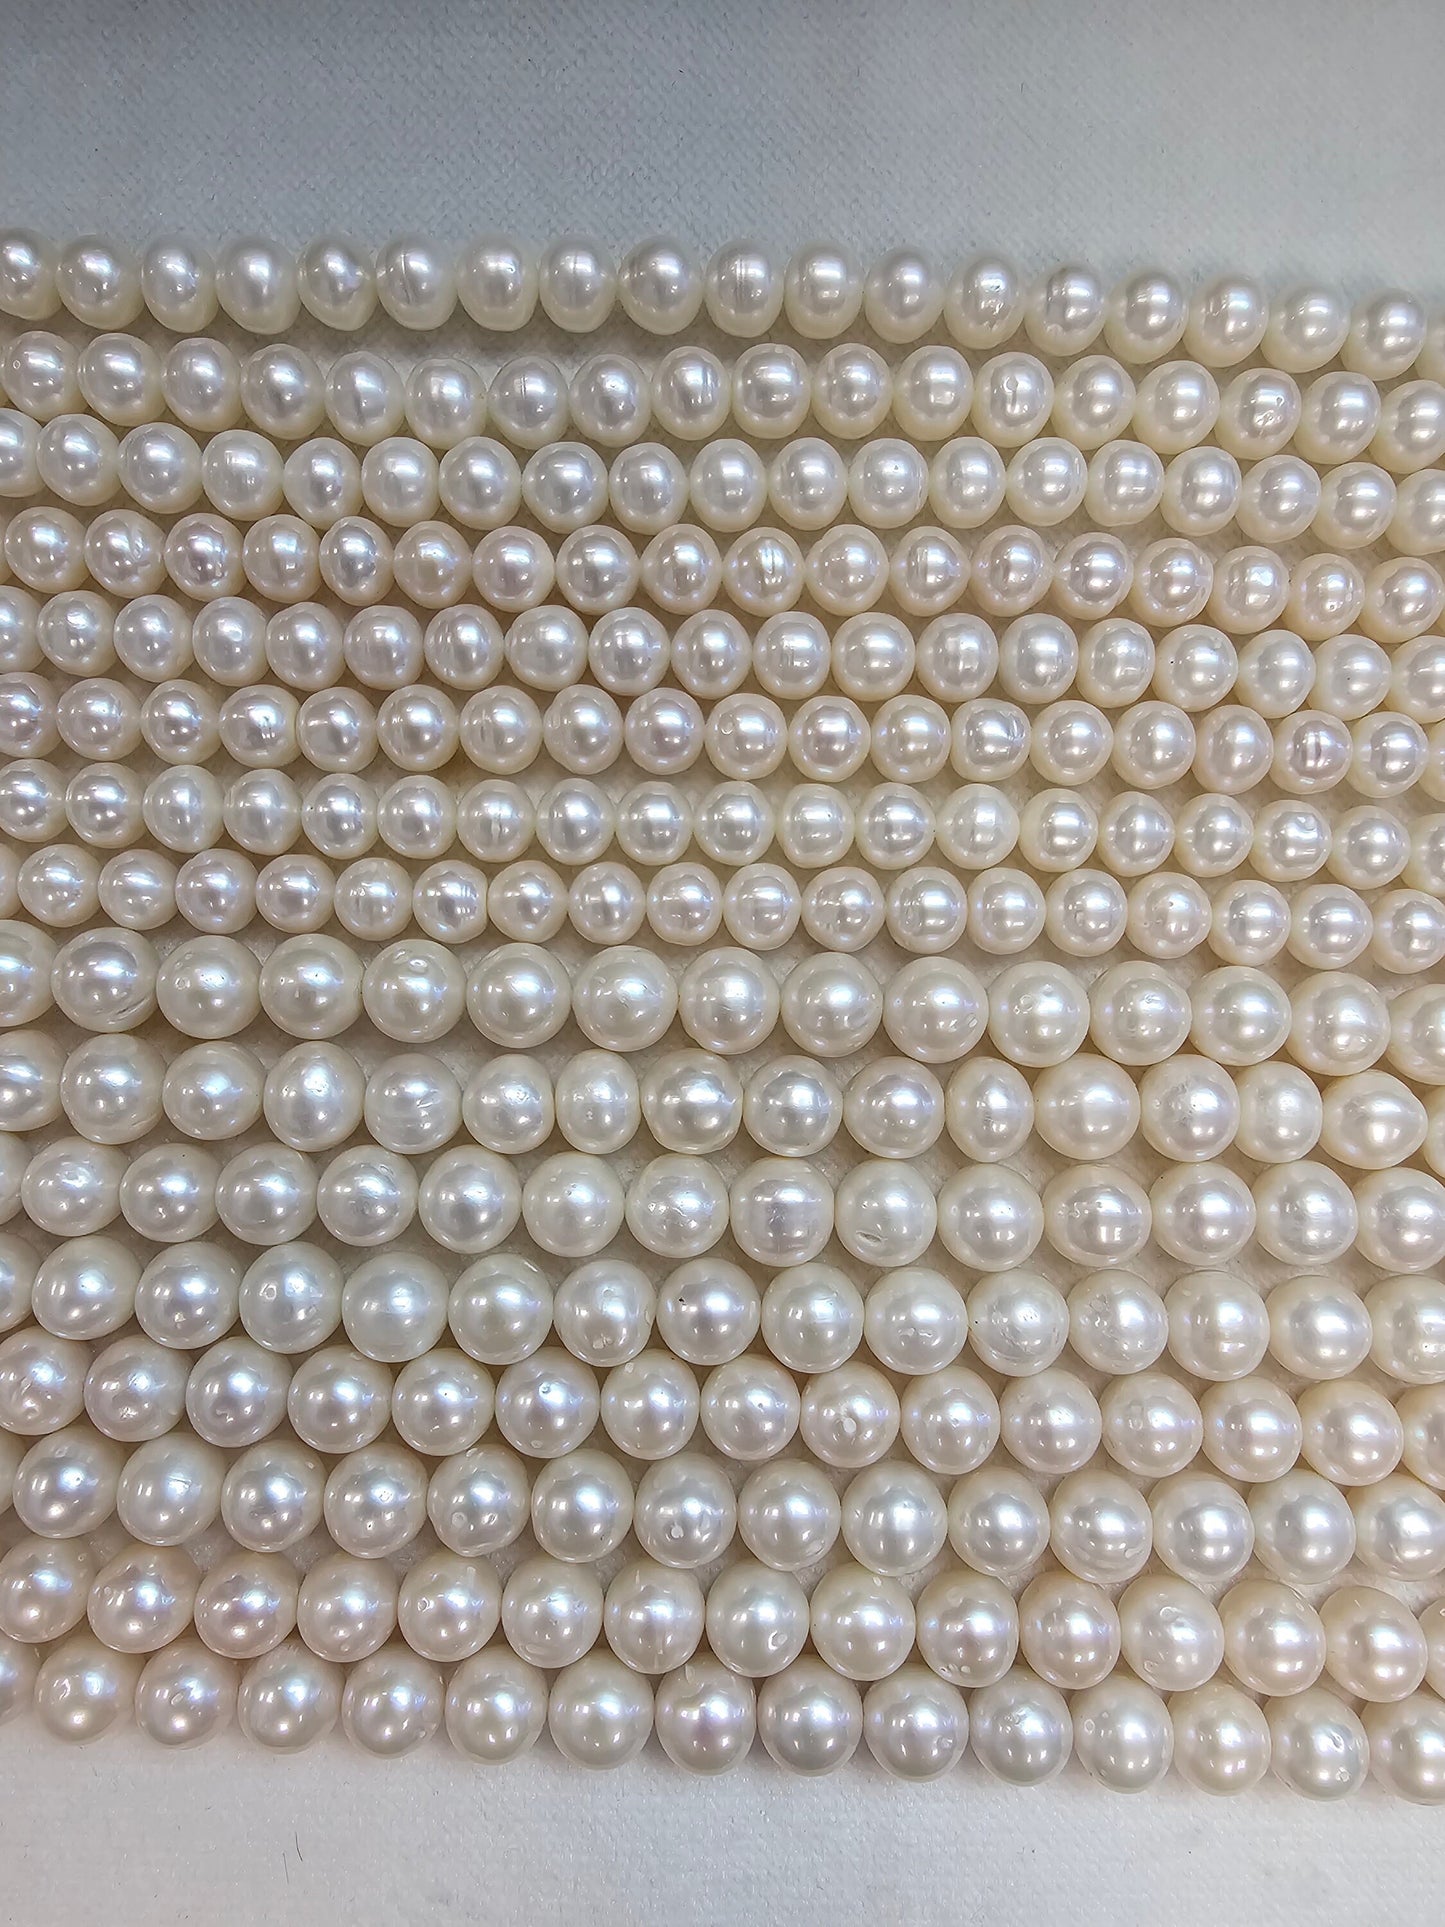 Natural White Round Freshwater Pearl with strand length 16" size 9-10mm, 11-12mm